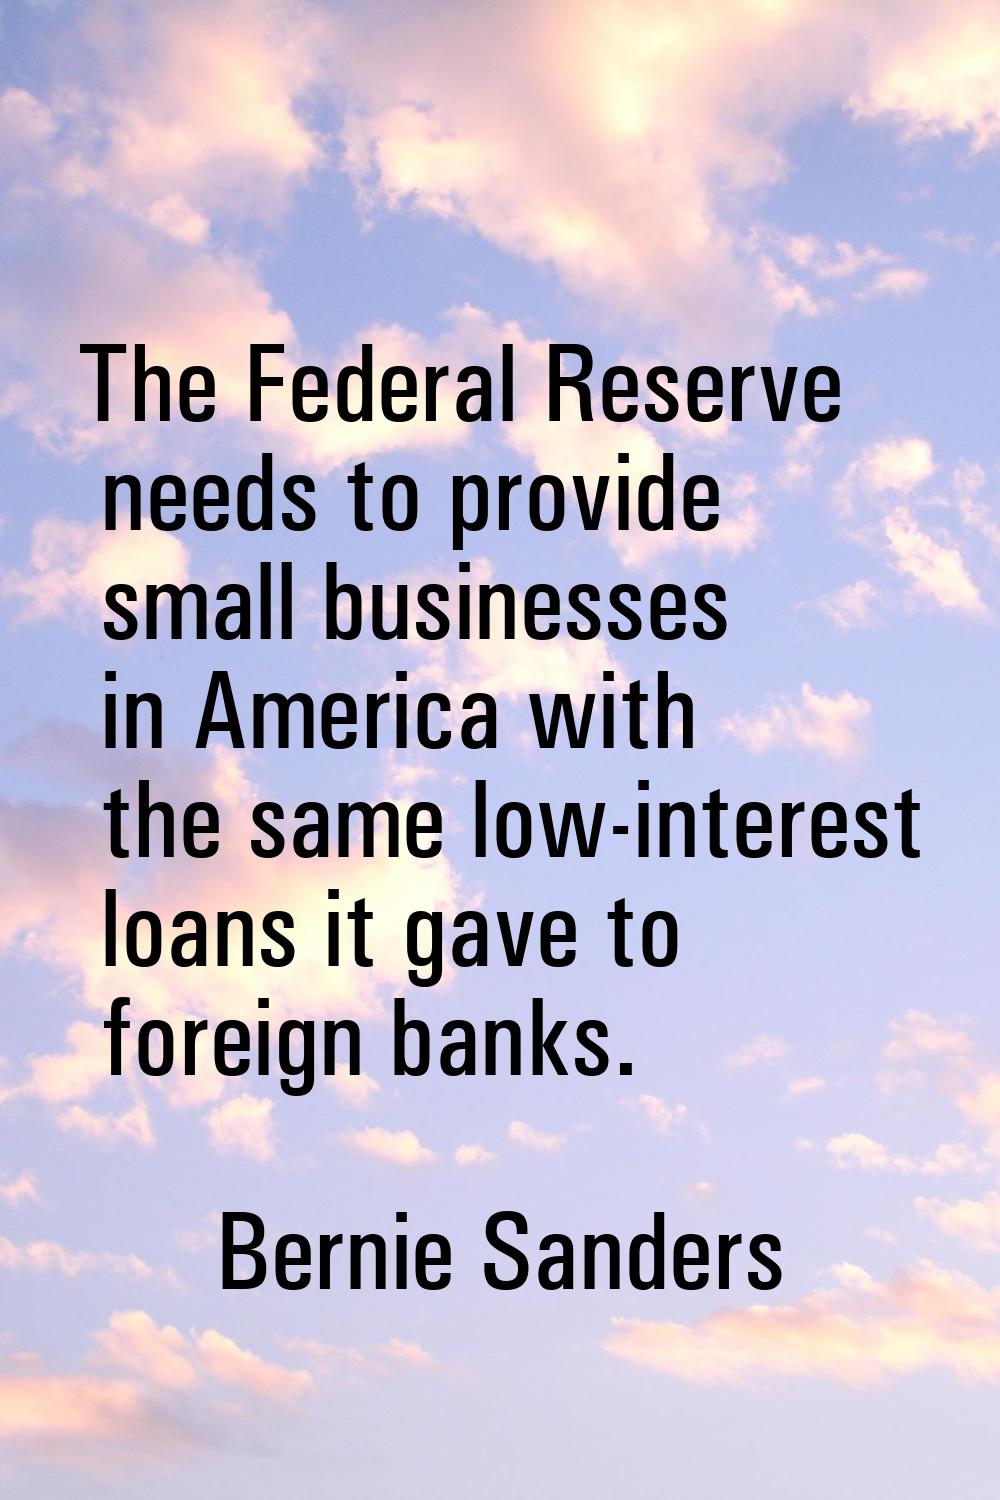 The Federal Reserve needs to provide small businesses in America with the same low-interest loans i